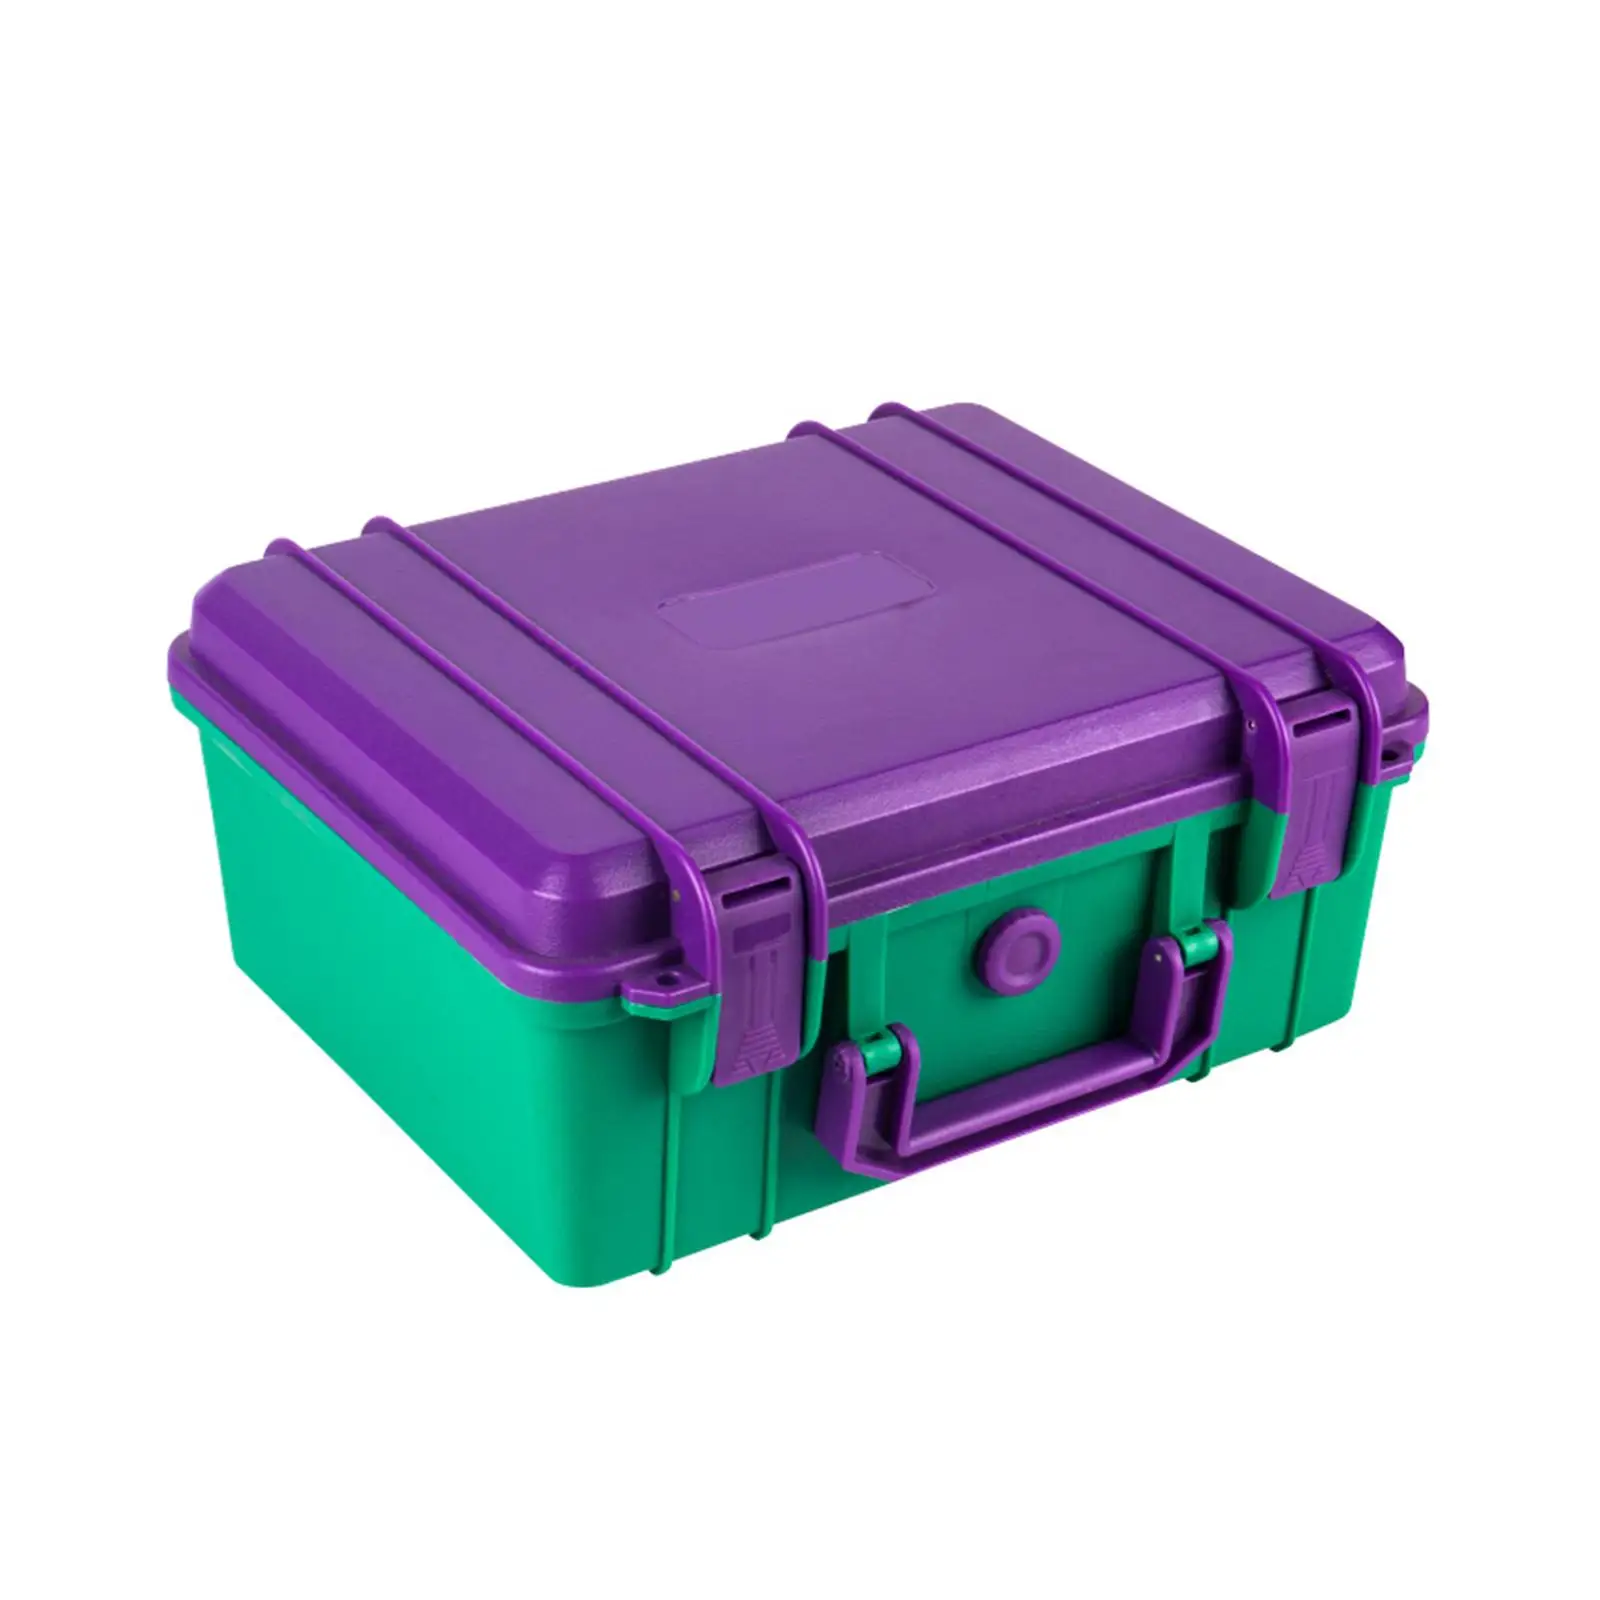 Protective Case Outdoor Camping Accessories Organizer Impact Resistant Portable Organization Violet and Green Safety Tool Case